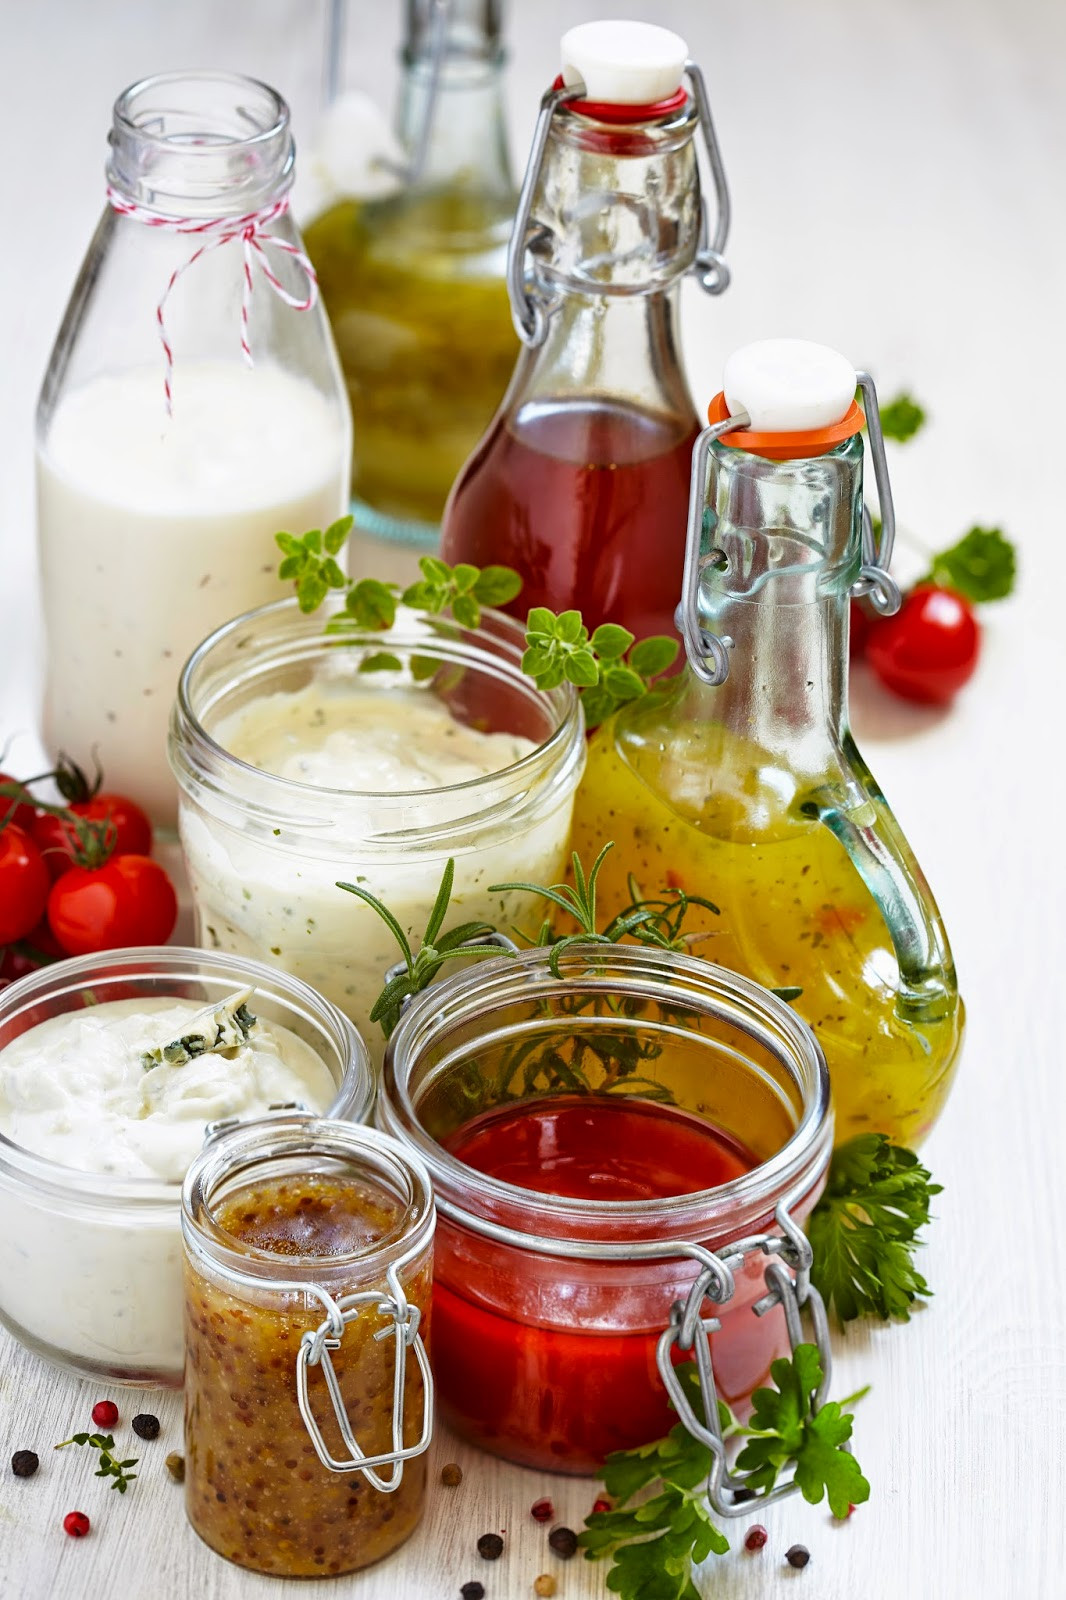 Salads Dressing Recipes Healthy
 Passionately Raw 8 Healthy Easy to Make Raw Salad Dressings